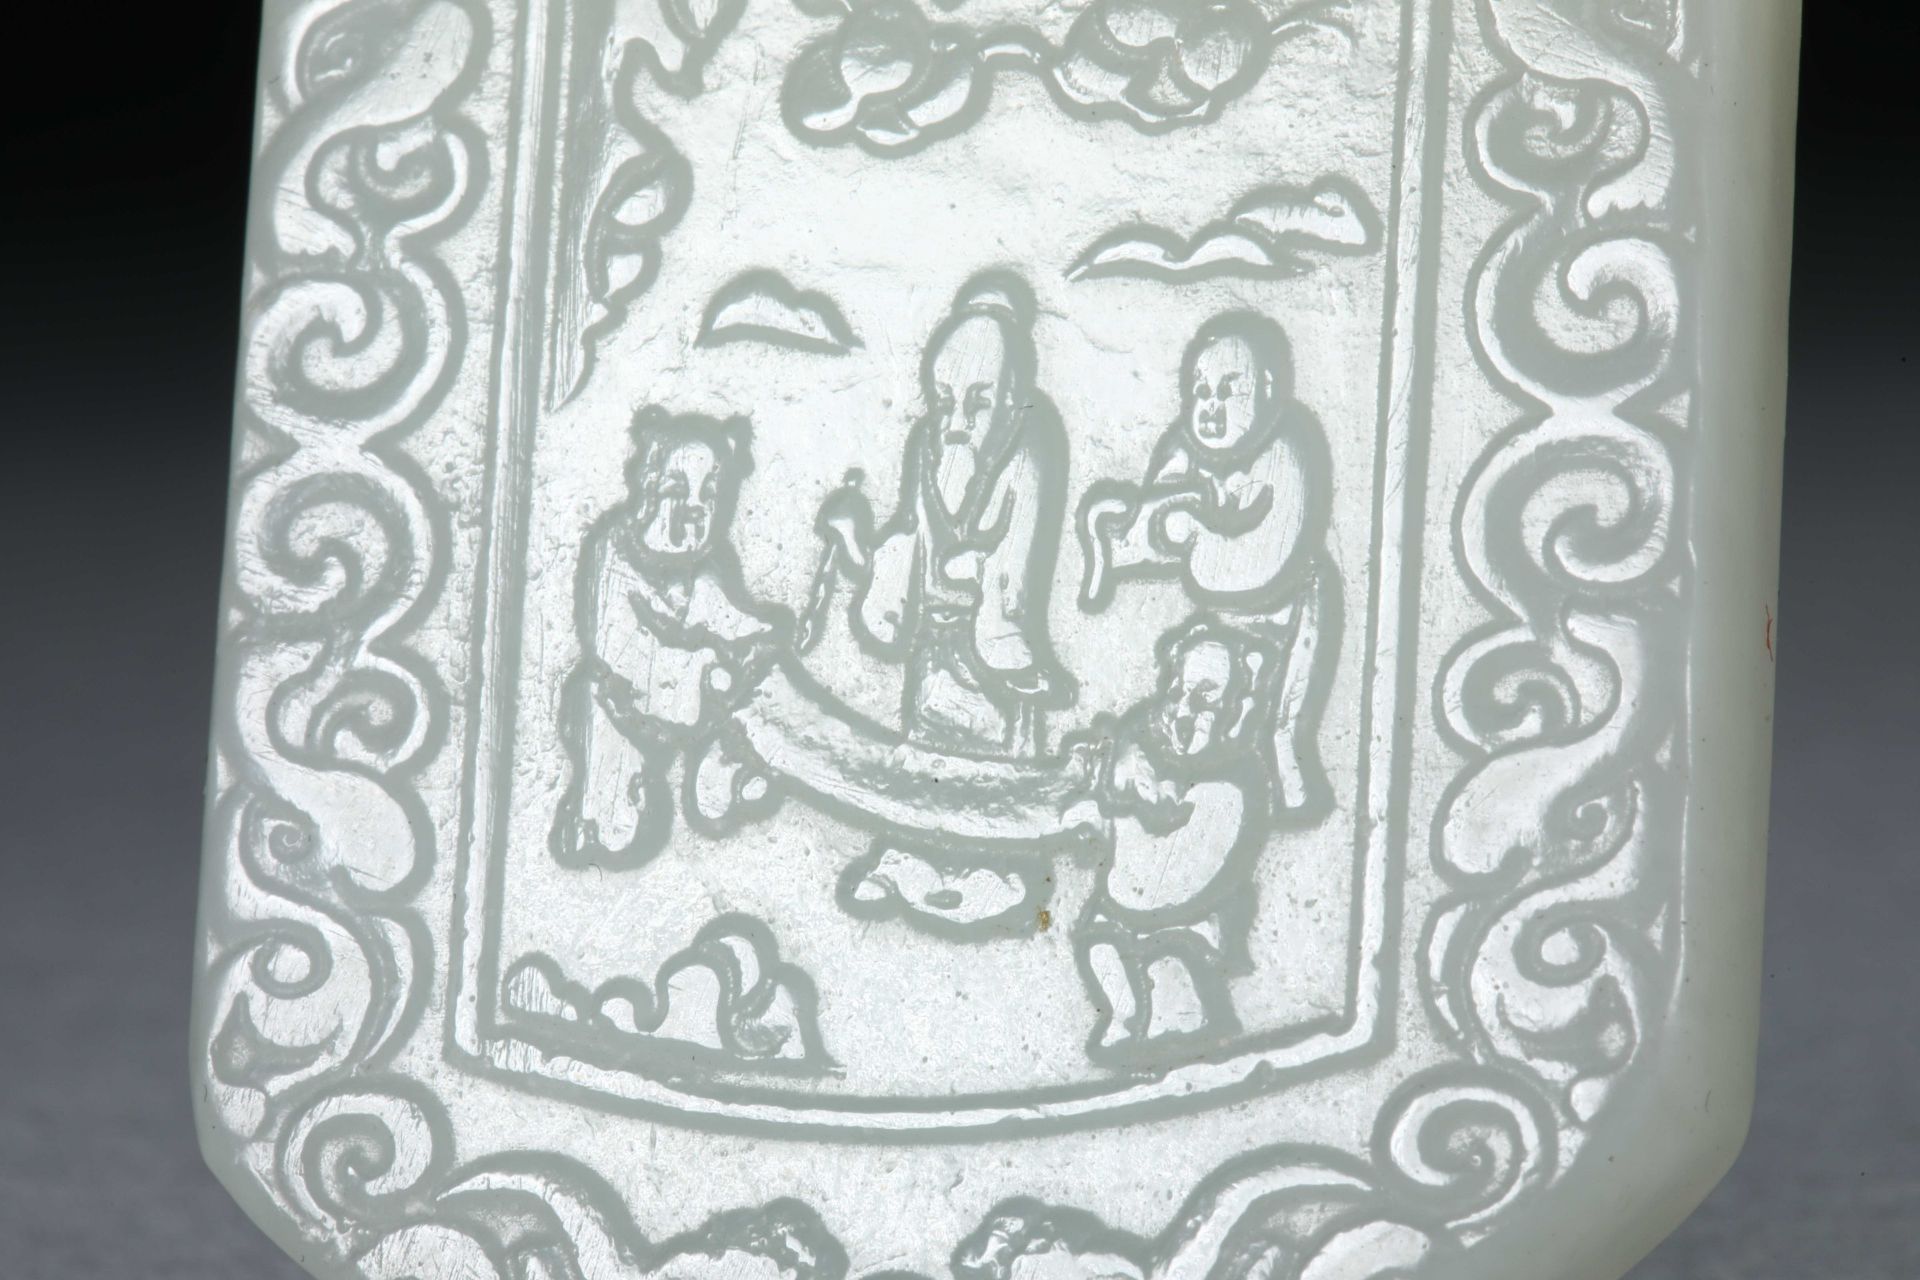 Hetian jade carved character card - Image 3 of 6